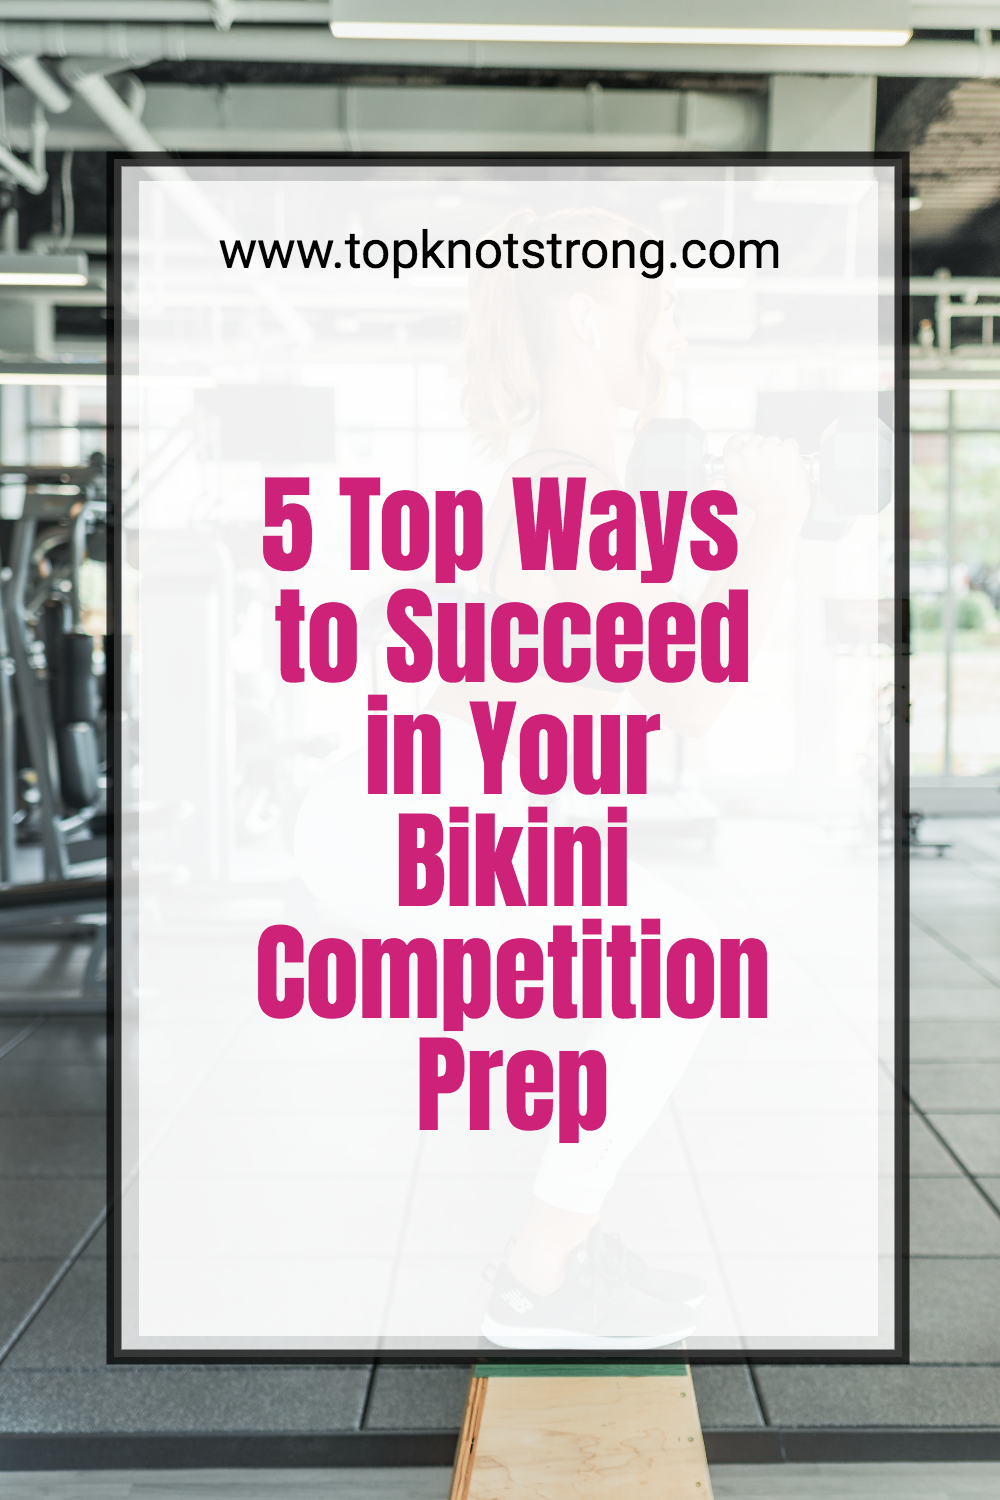 5 Top Ways to Succeed in Your Bikini Competition Prep